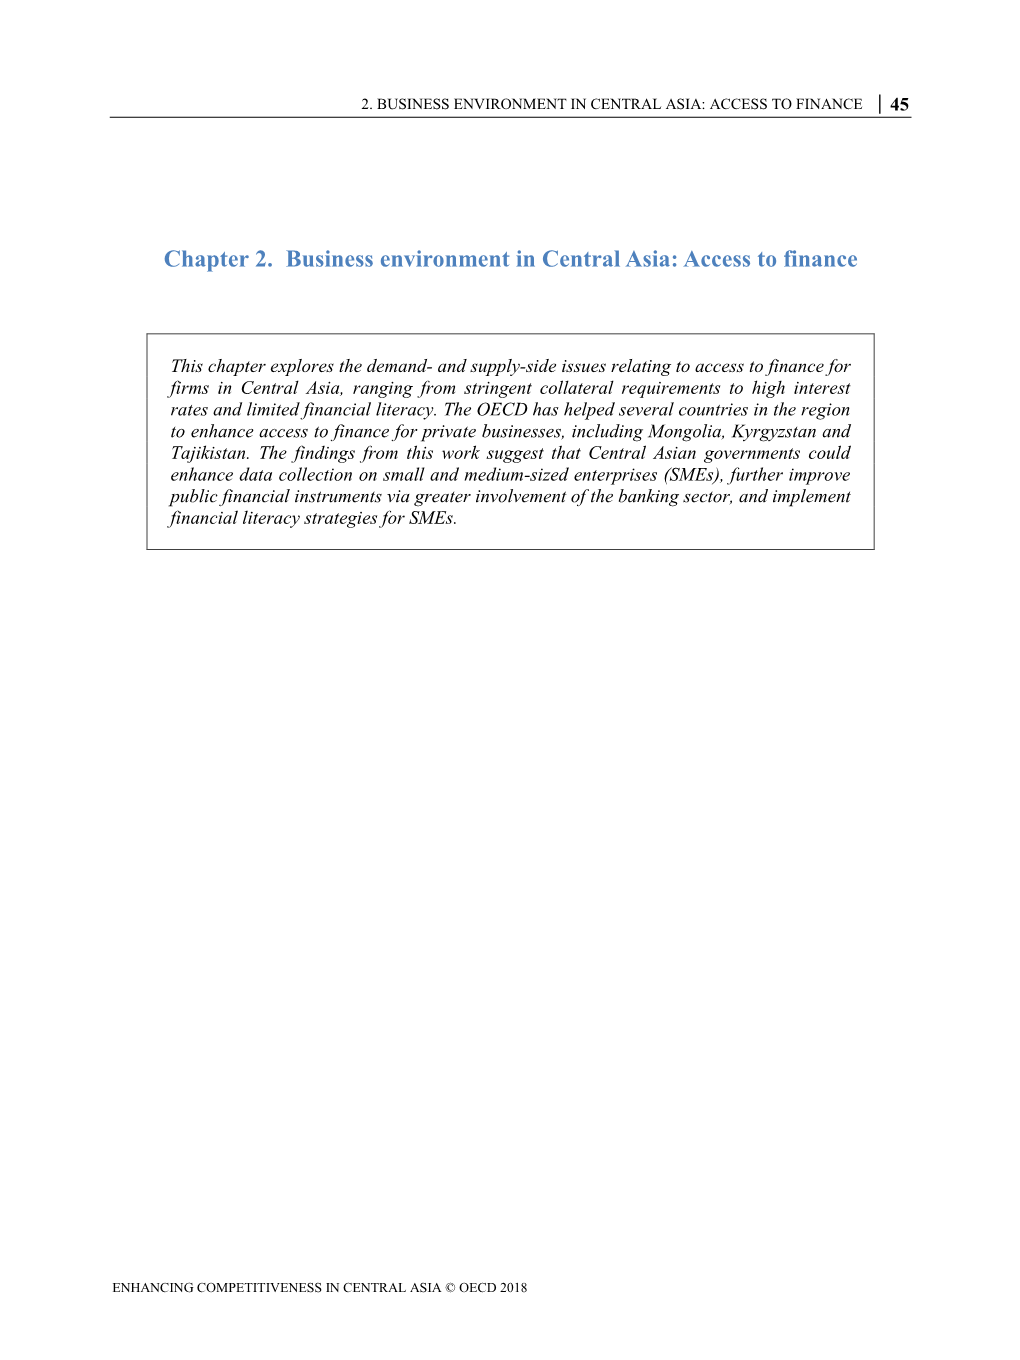 Chapter 2. Business Environment in Central Asia: Access to Finance